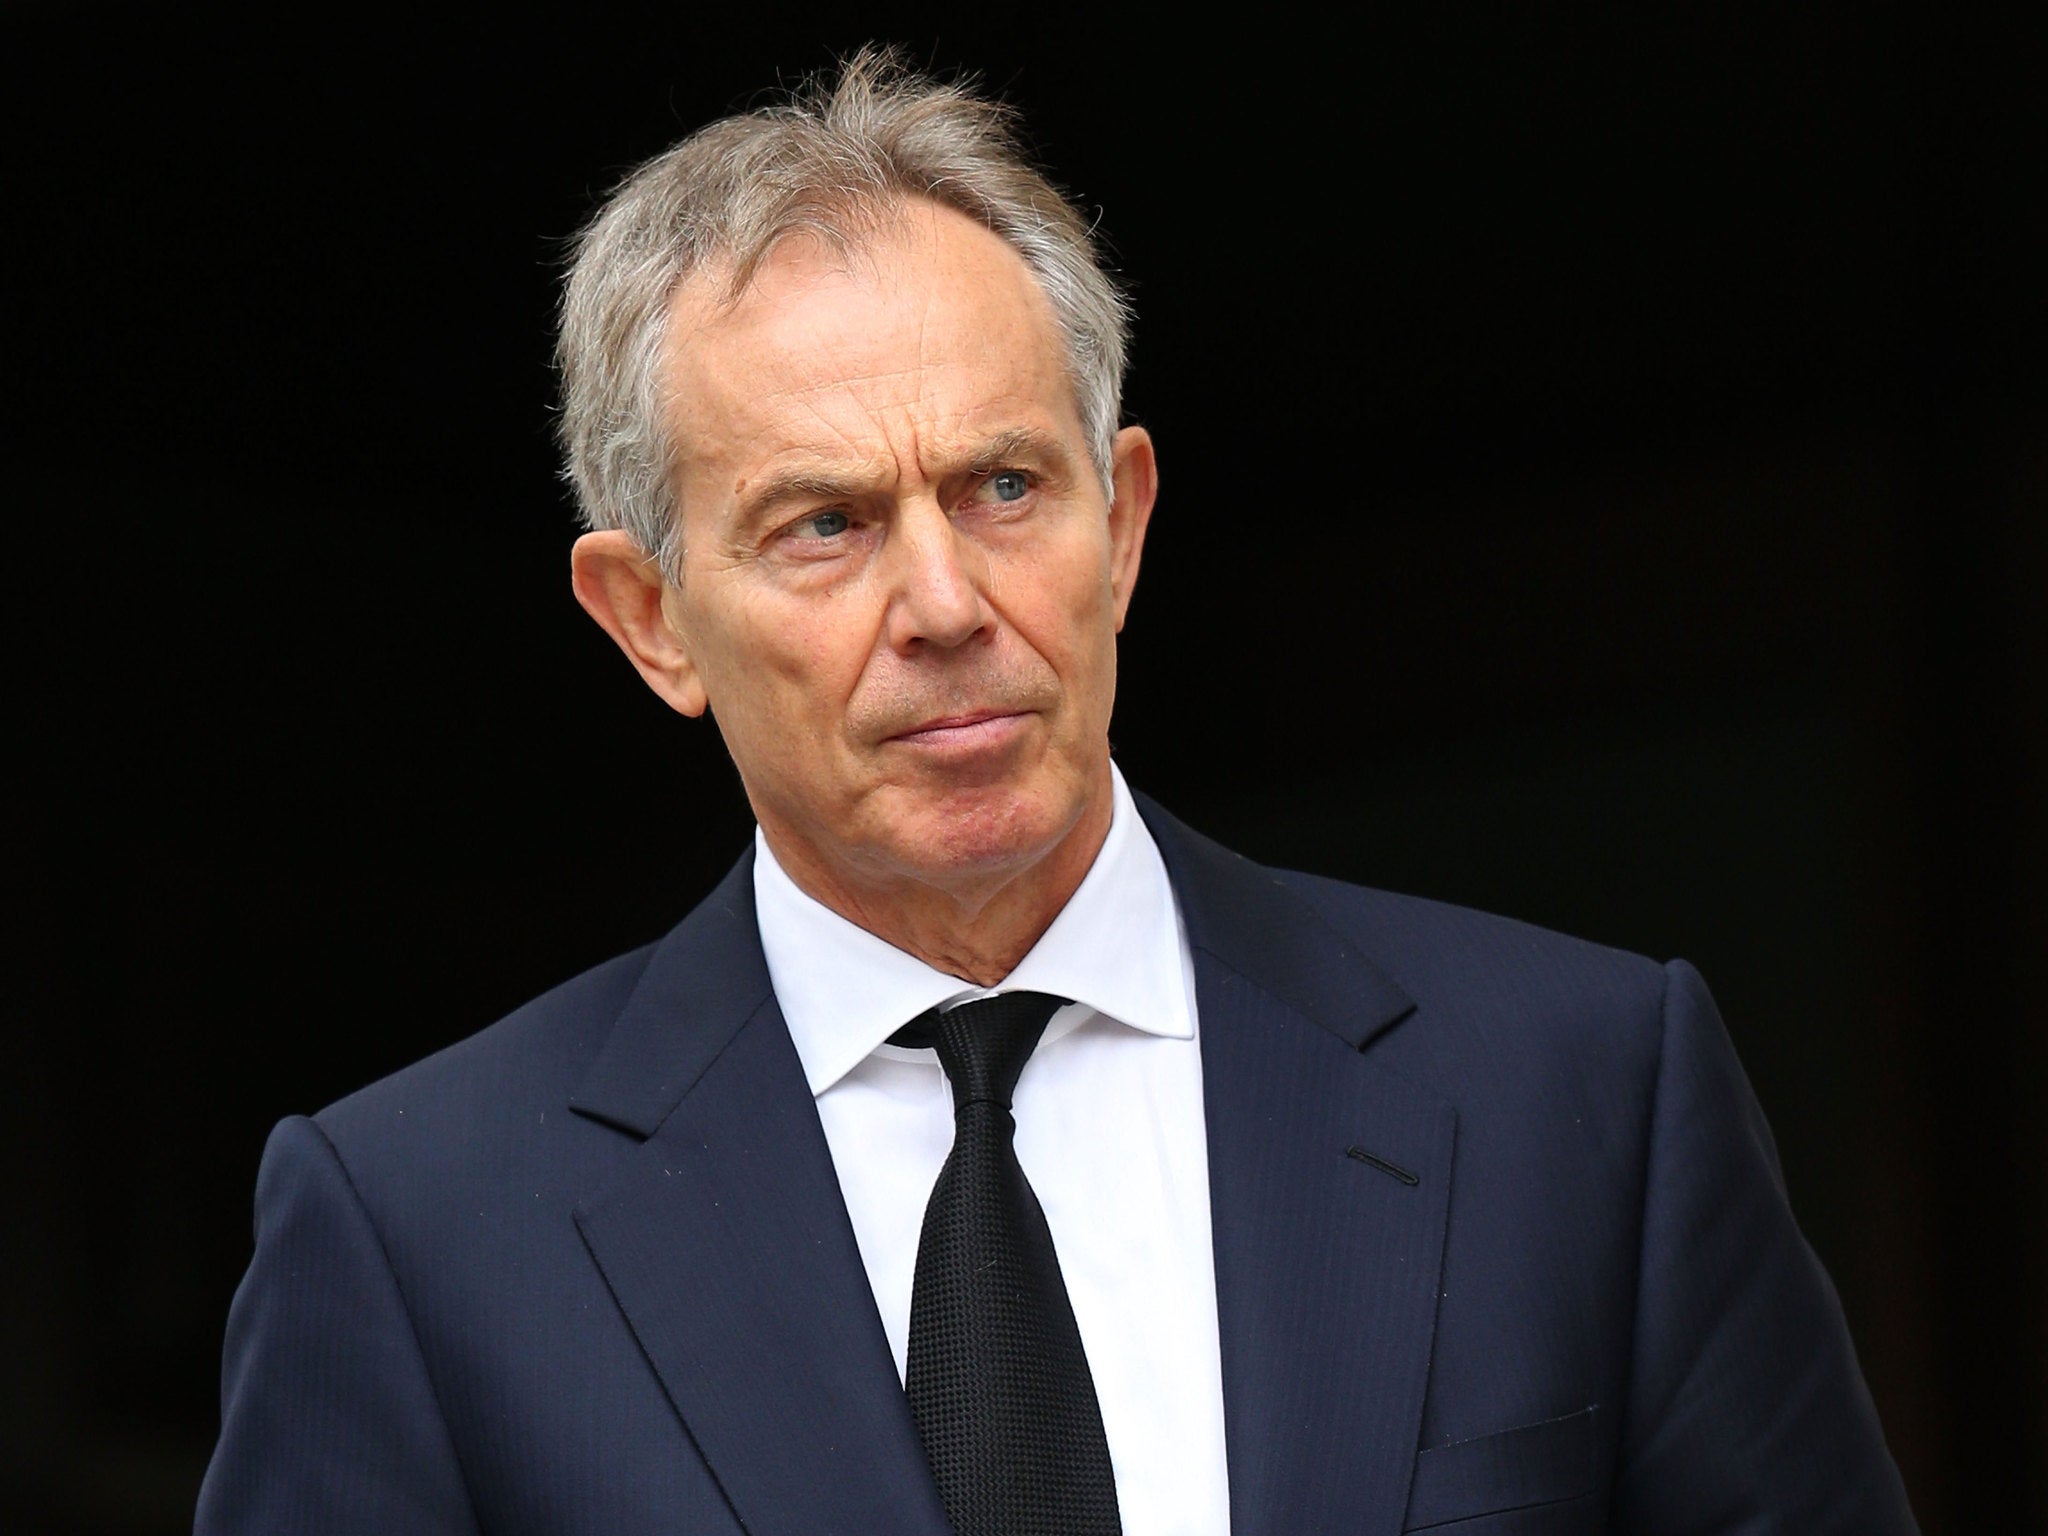 Tony Blair: 'Of course the Iraq of 2014 bears, in part, the imprint of the removal of Saddam Hussein 11 years ago'